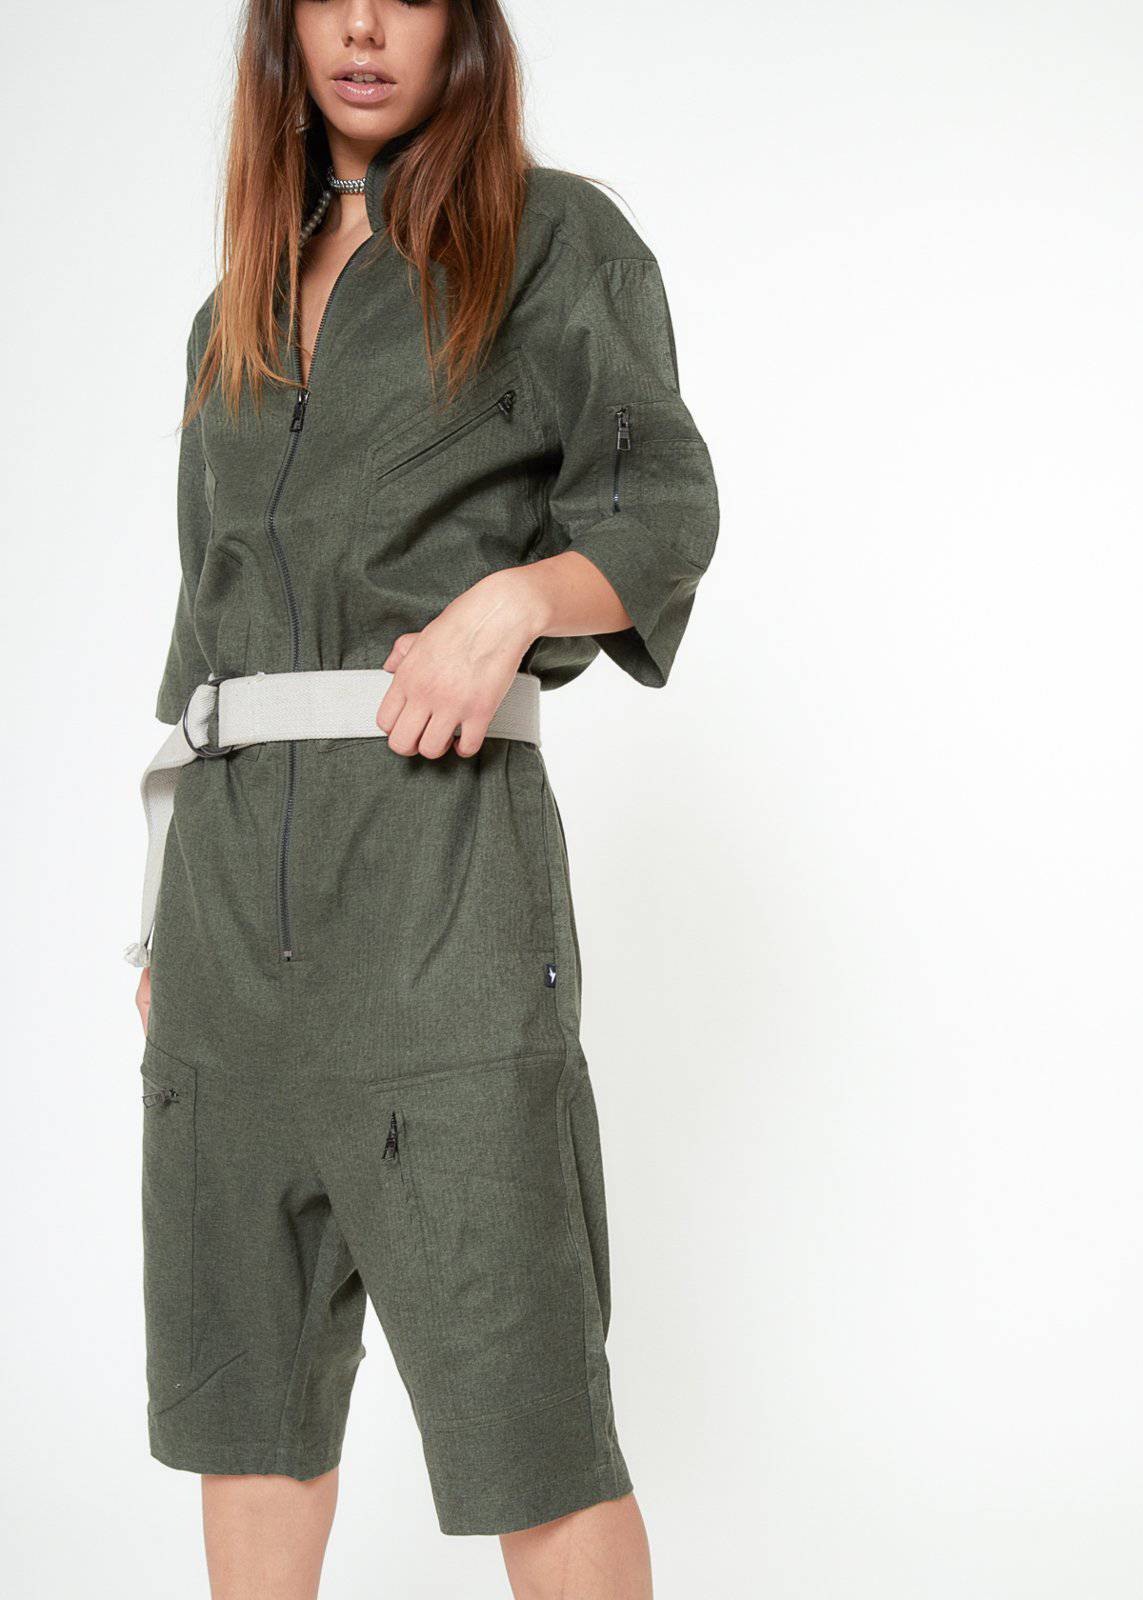 Unisex Short Sleeve Overall With Zipper Pockets In Olive by Shop at Konus